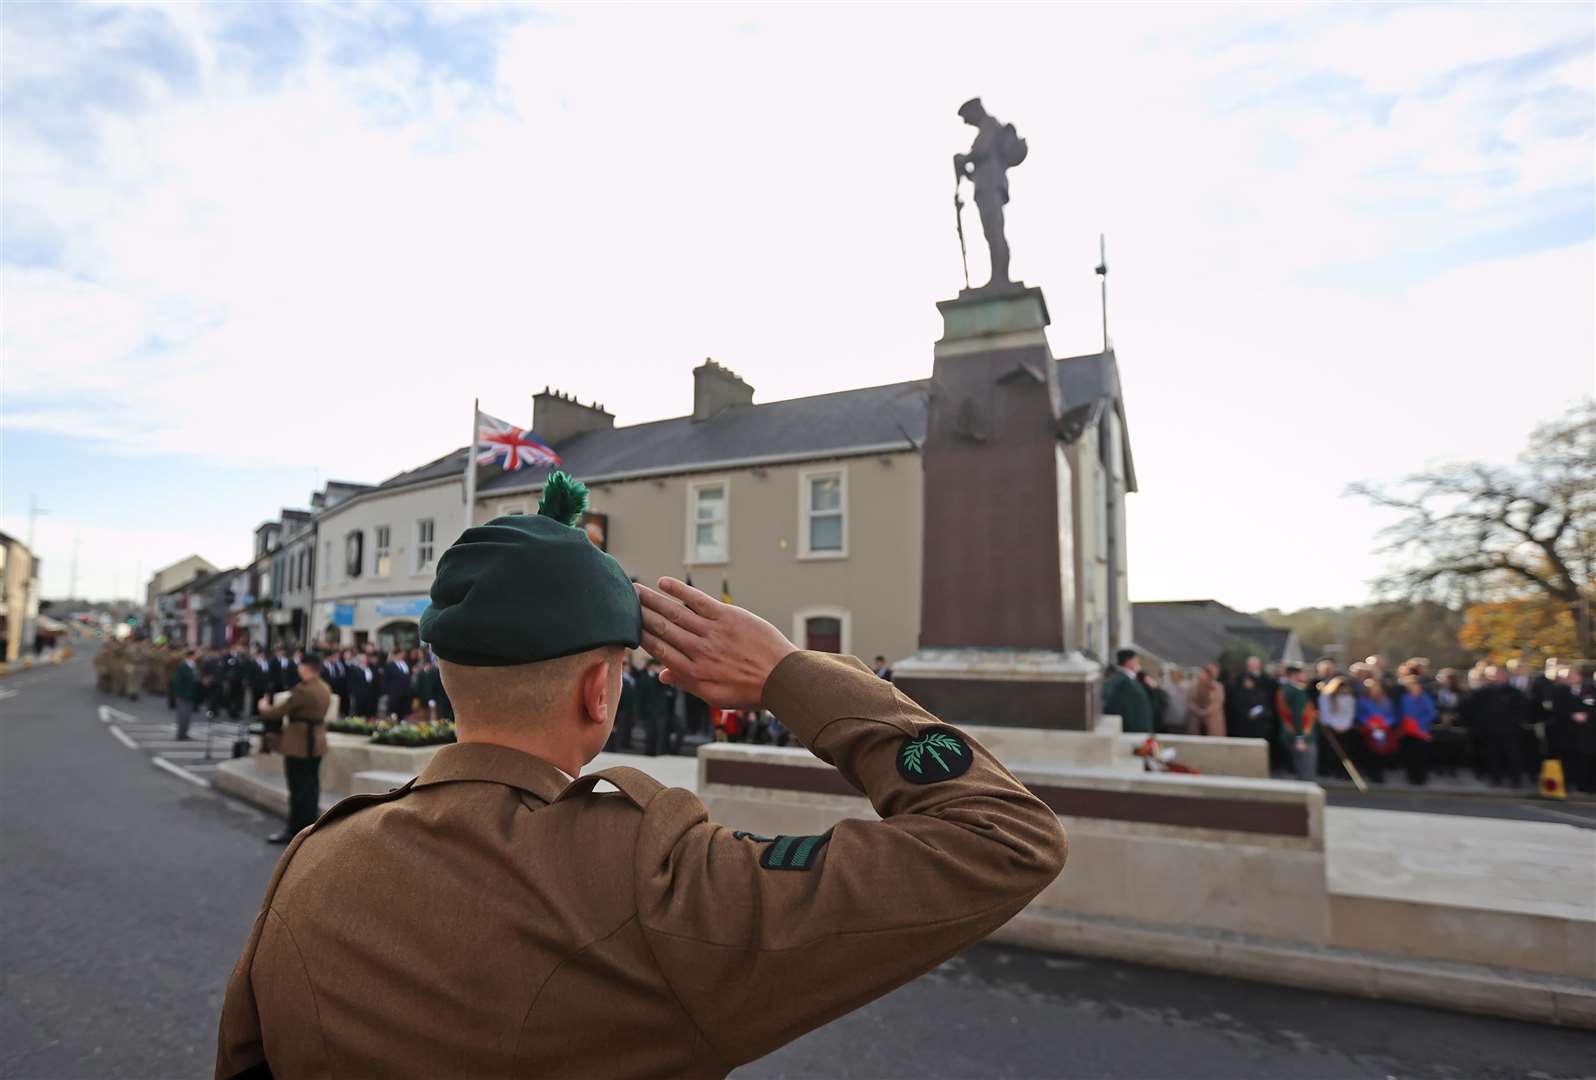 A soldier salutes during the Remembrance Sunday service at the cenotaph in Enniskillen (Liam McBurney/PA)